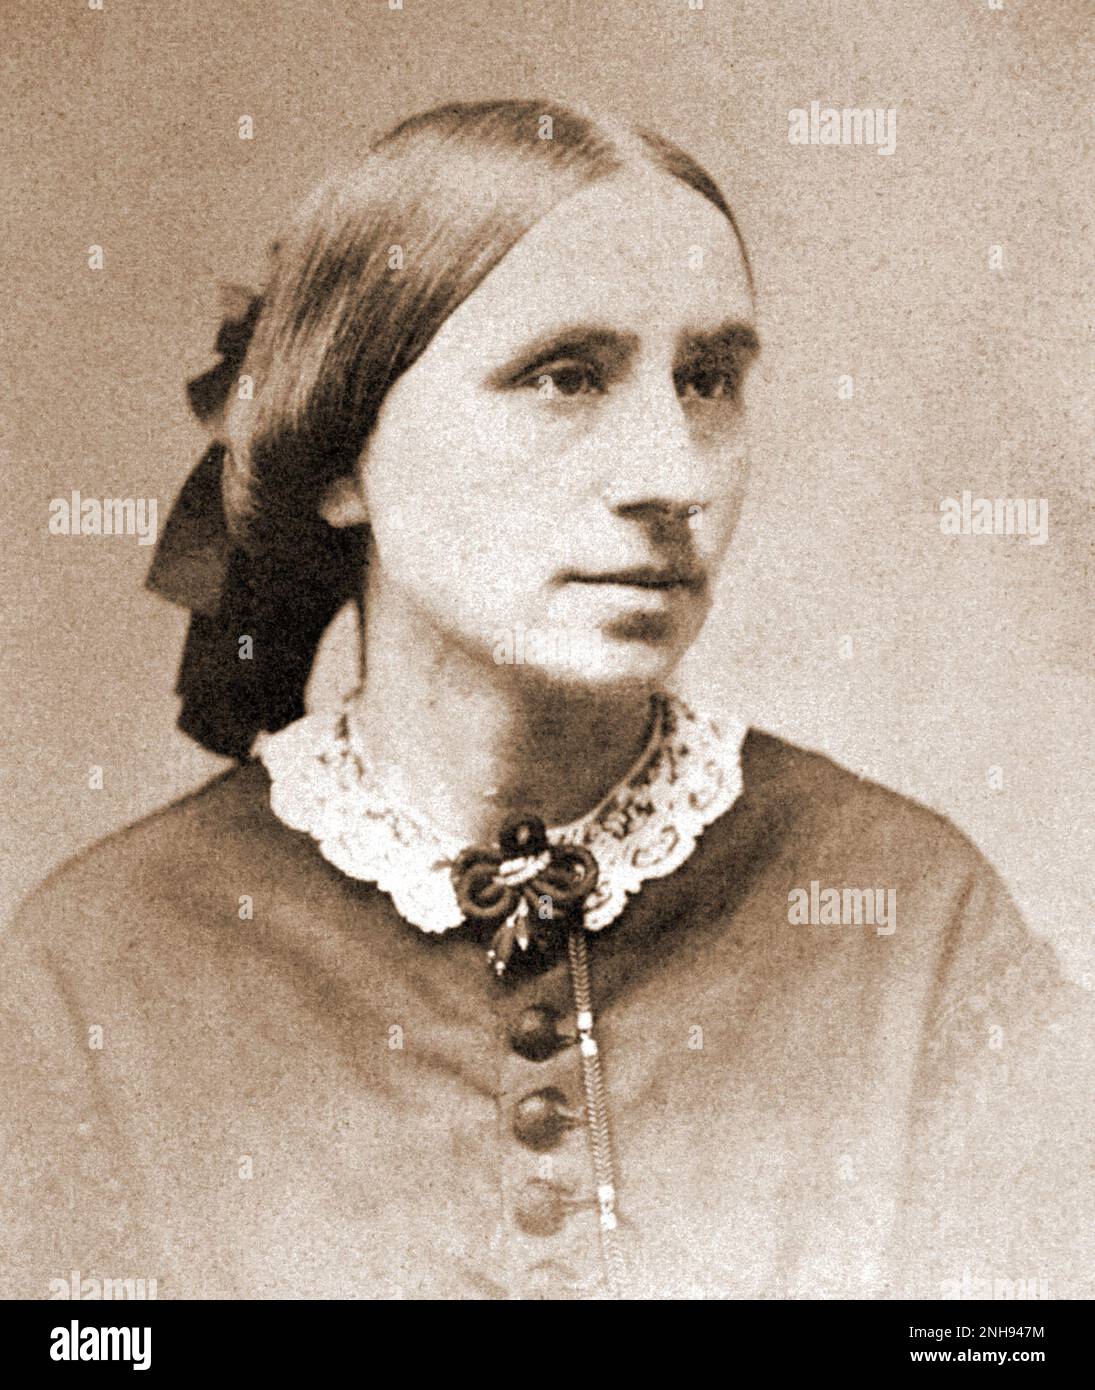 Marie Elisabeth Zakrzewska (1829-1902), Polish-American physician who made her name as a pioneering female doctor in the United States and established the New England Hospital for Women and Children. Photo ca. 1845-1855./n/n Stock Photo